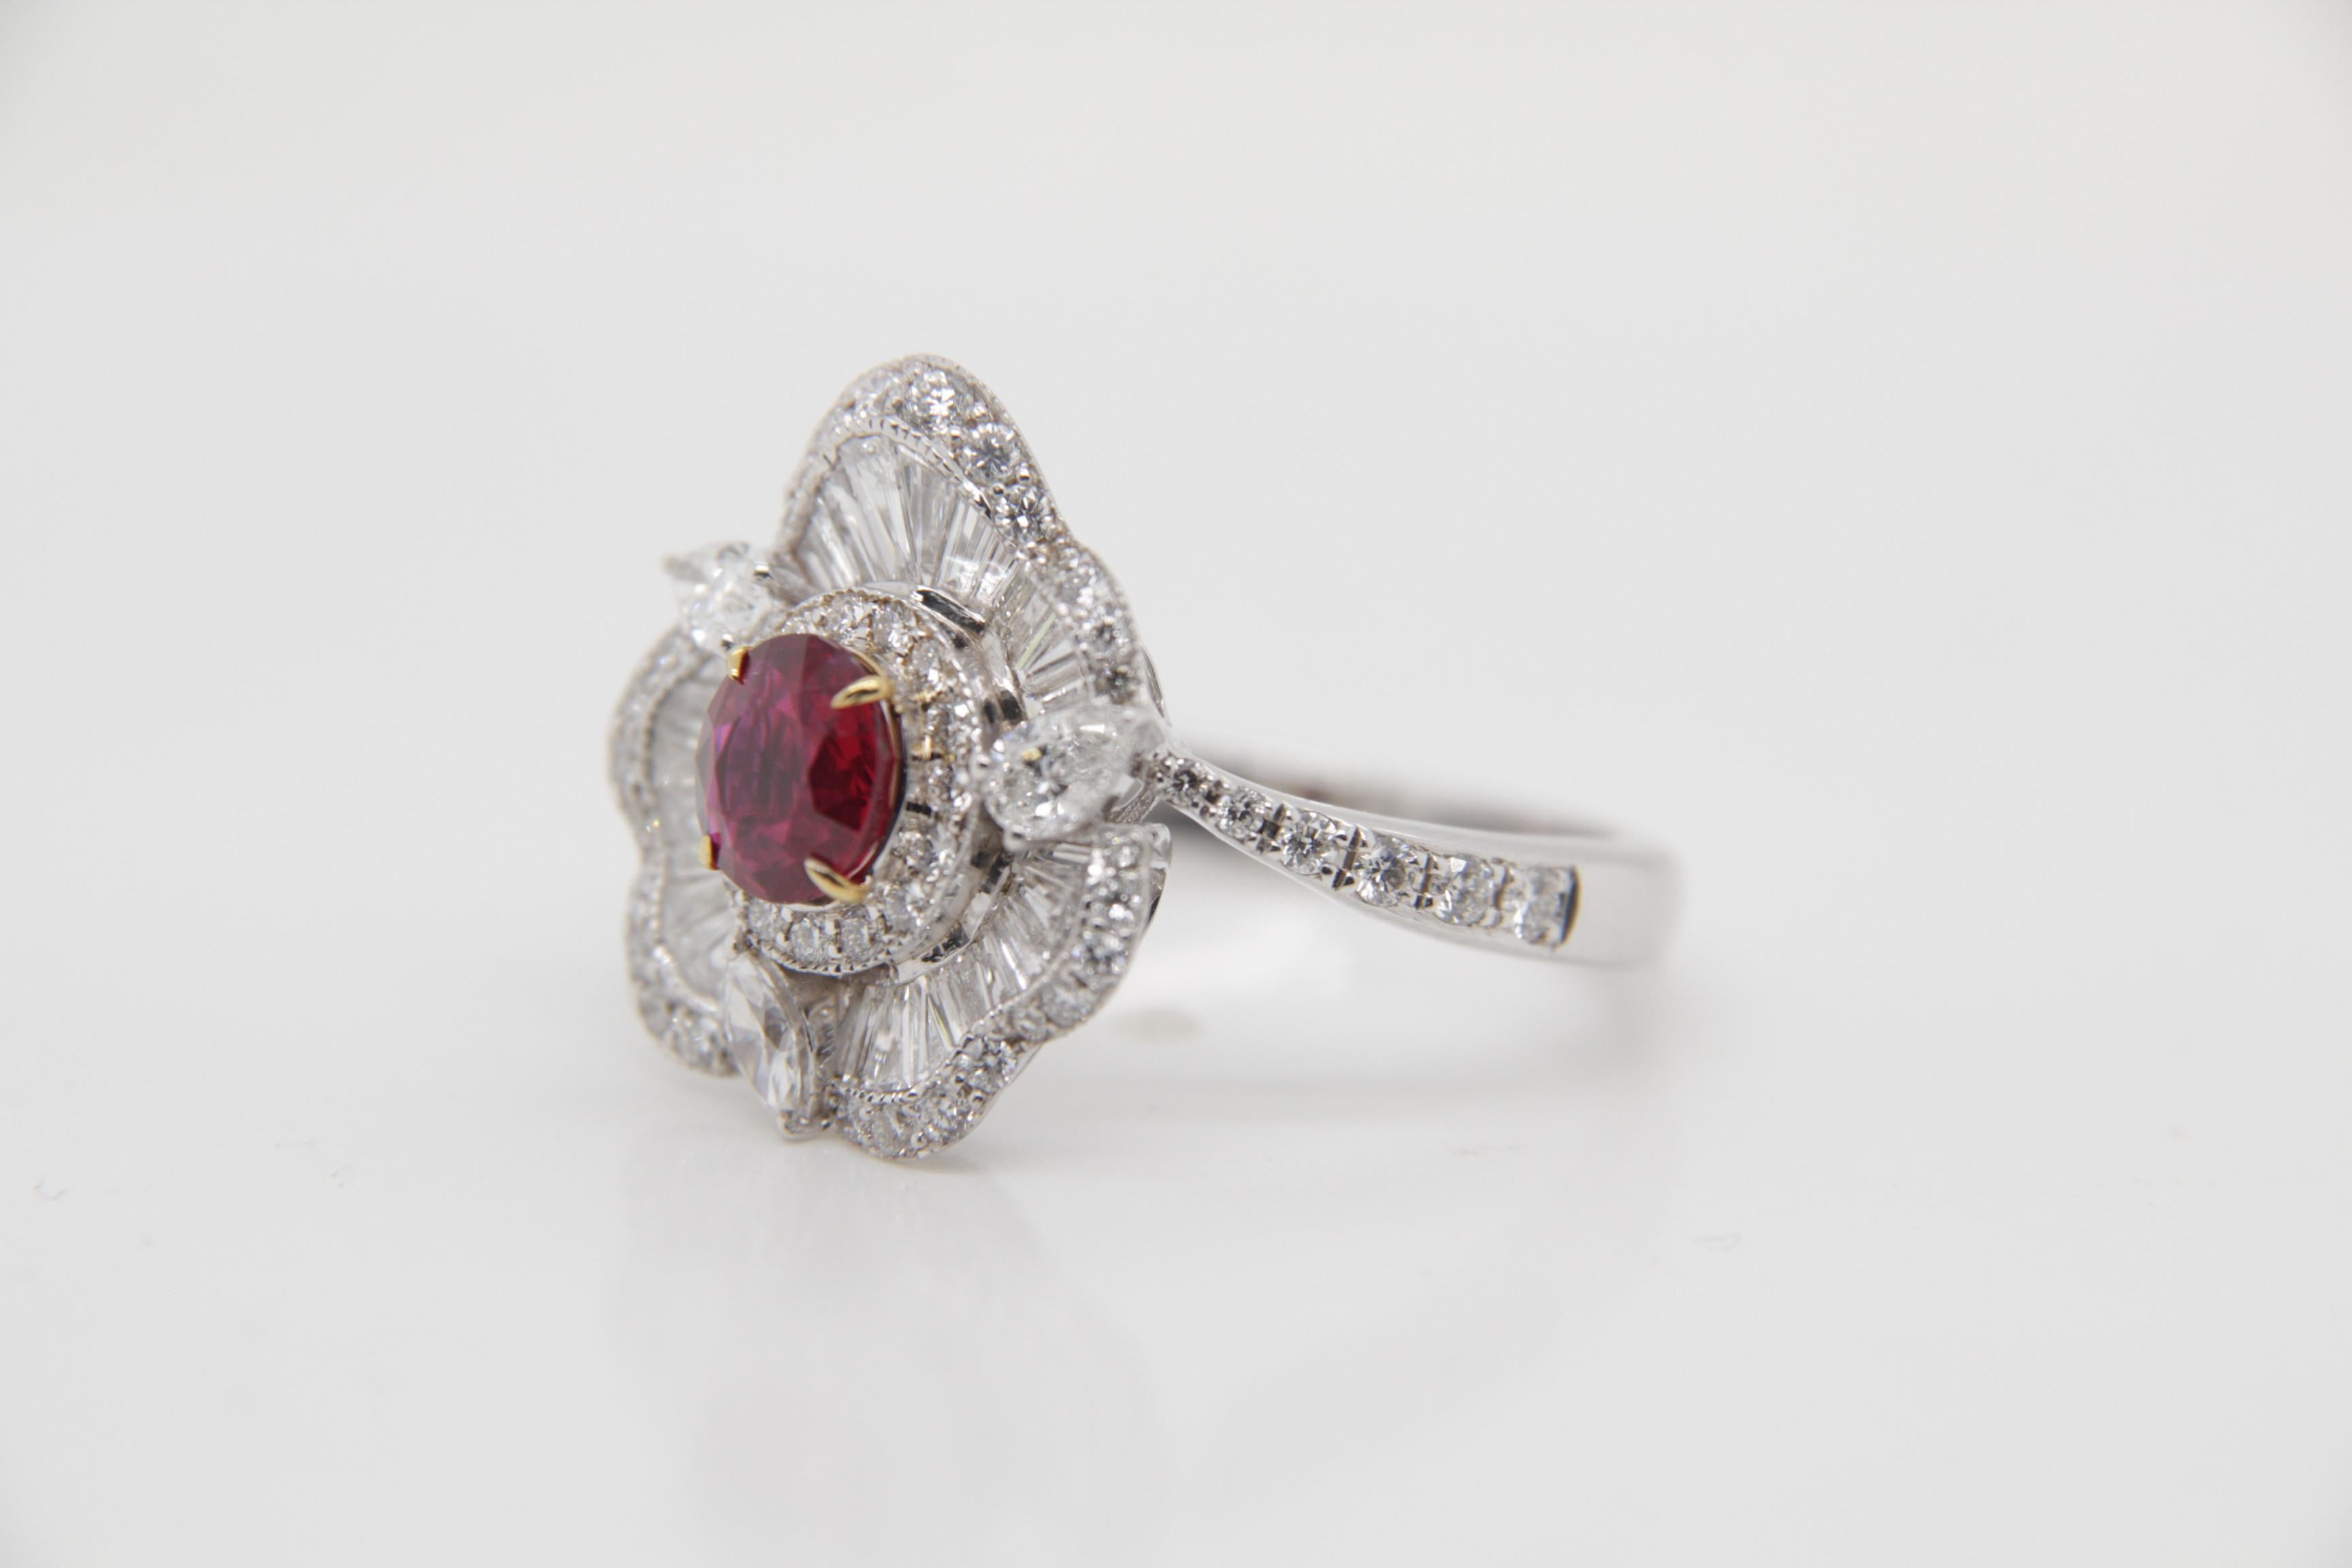 A brand new handcrafted ruby ring by Rewa Jewels. The ring's center stone is 0.89 carat Burmese ruby certified by Gem Research Swisslab (GRS) as natural, unheated, 'Pigeon blood' with the certificate number: 2021-111639. The piece has been set with